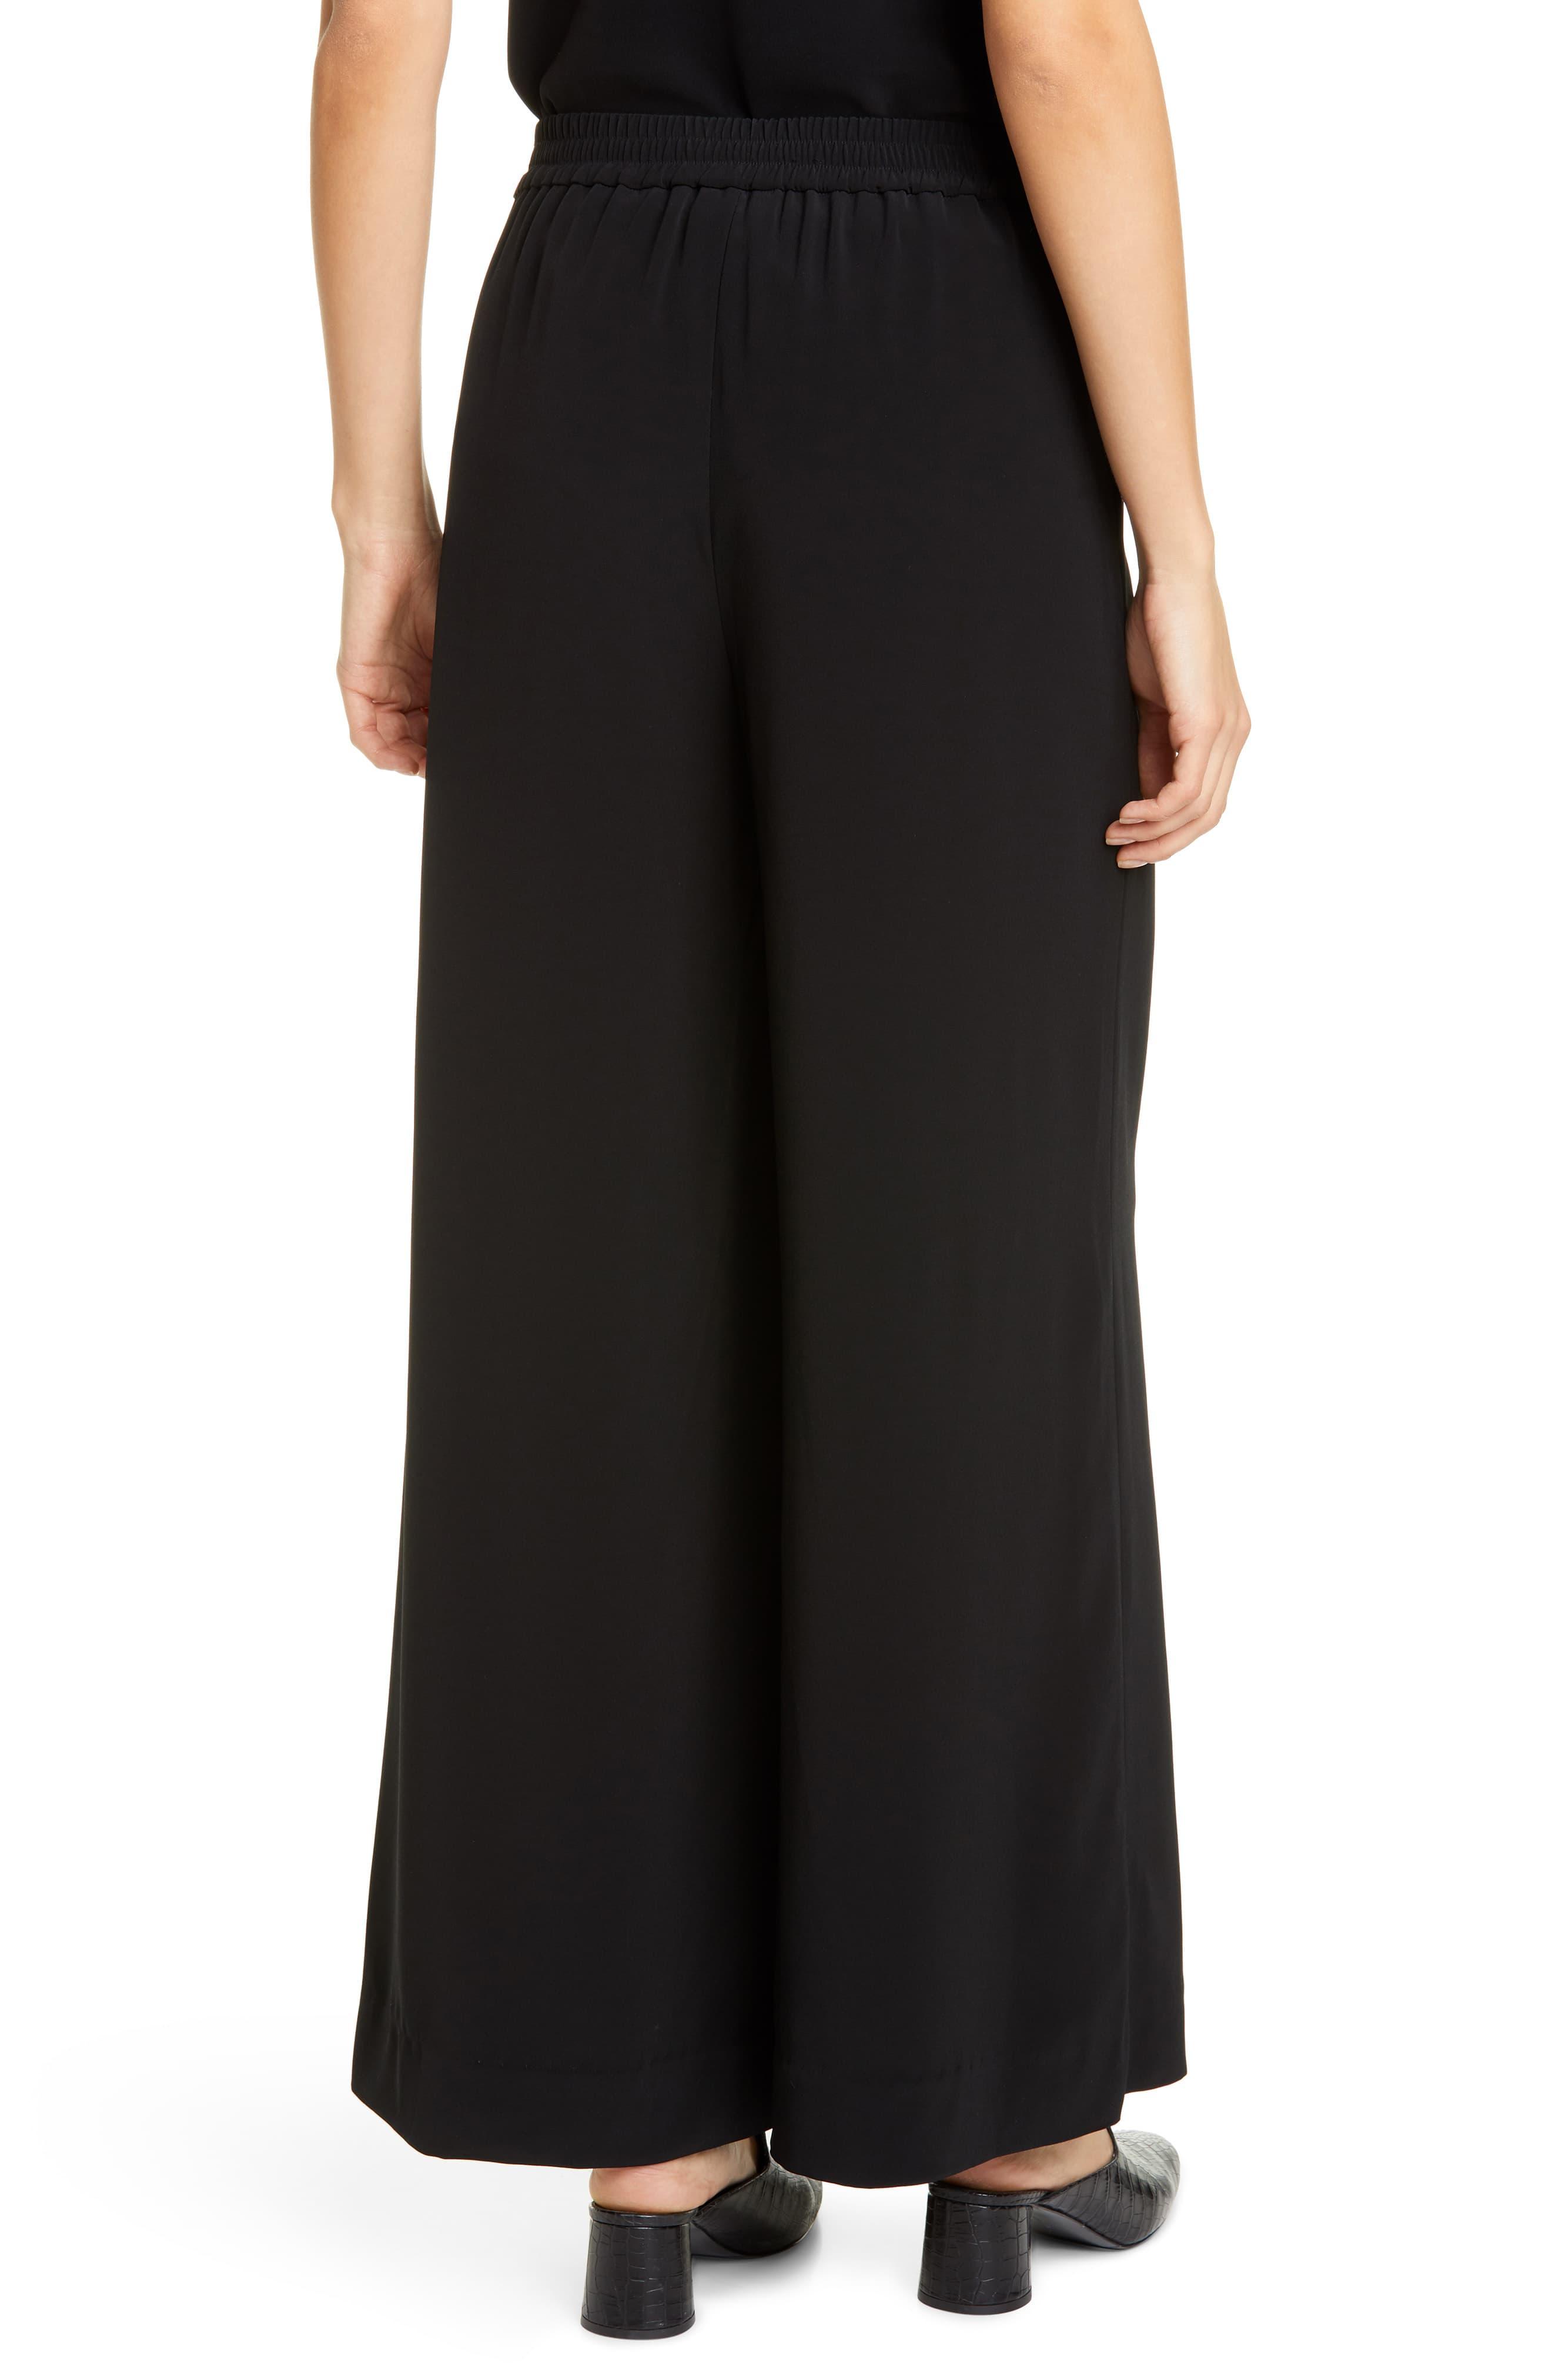 Co. Crepe Palazzo Pants in Black - Lyst